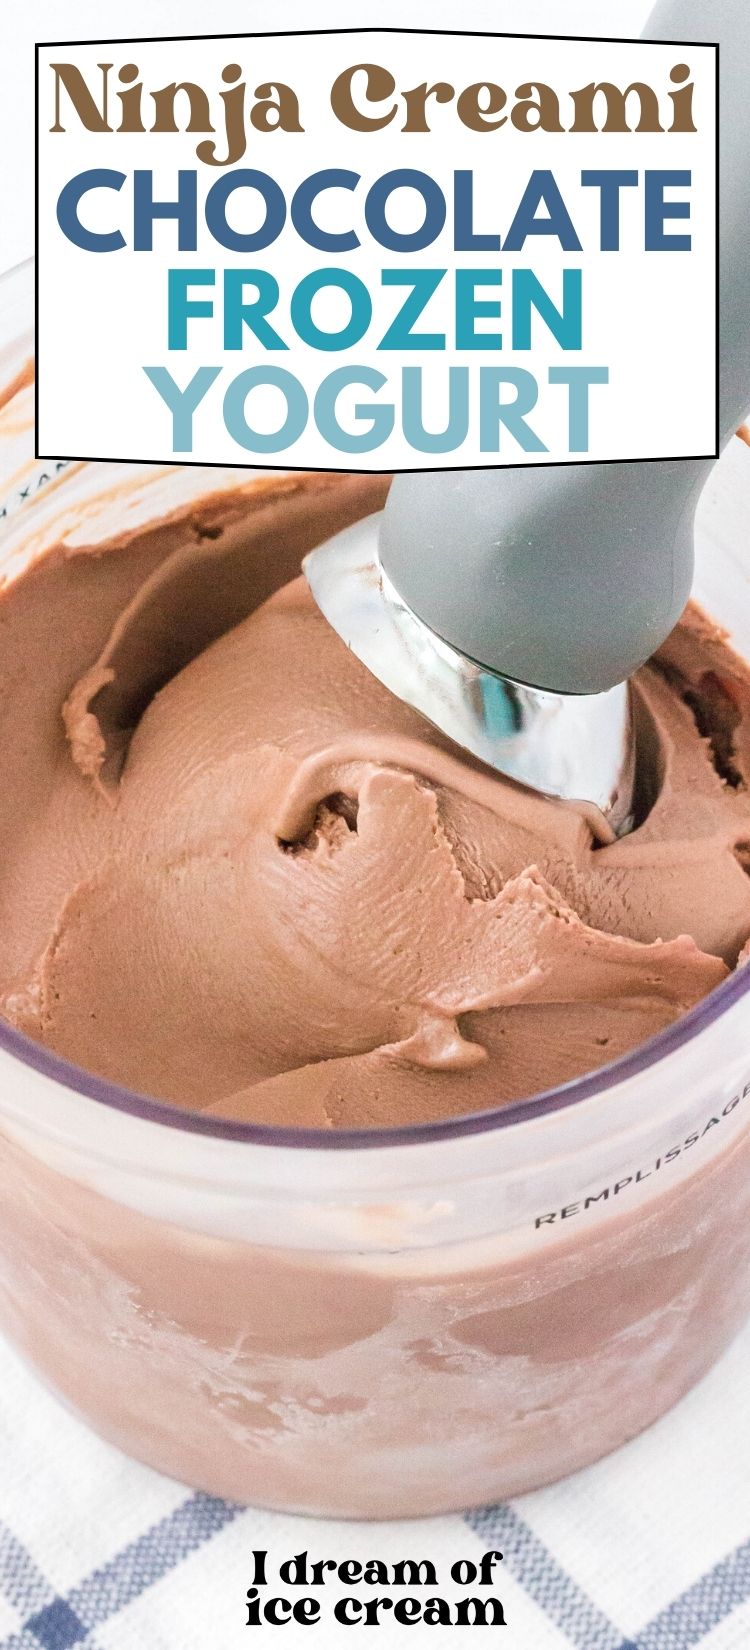 close-up view of chocolate frozen yogurt in a ninja creami pint container